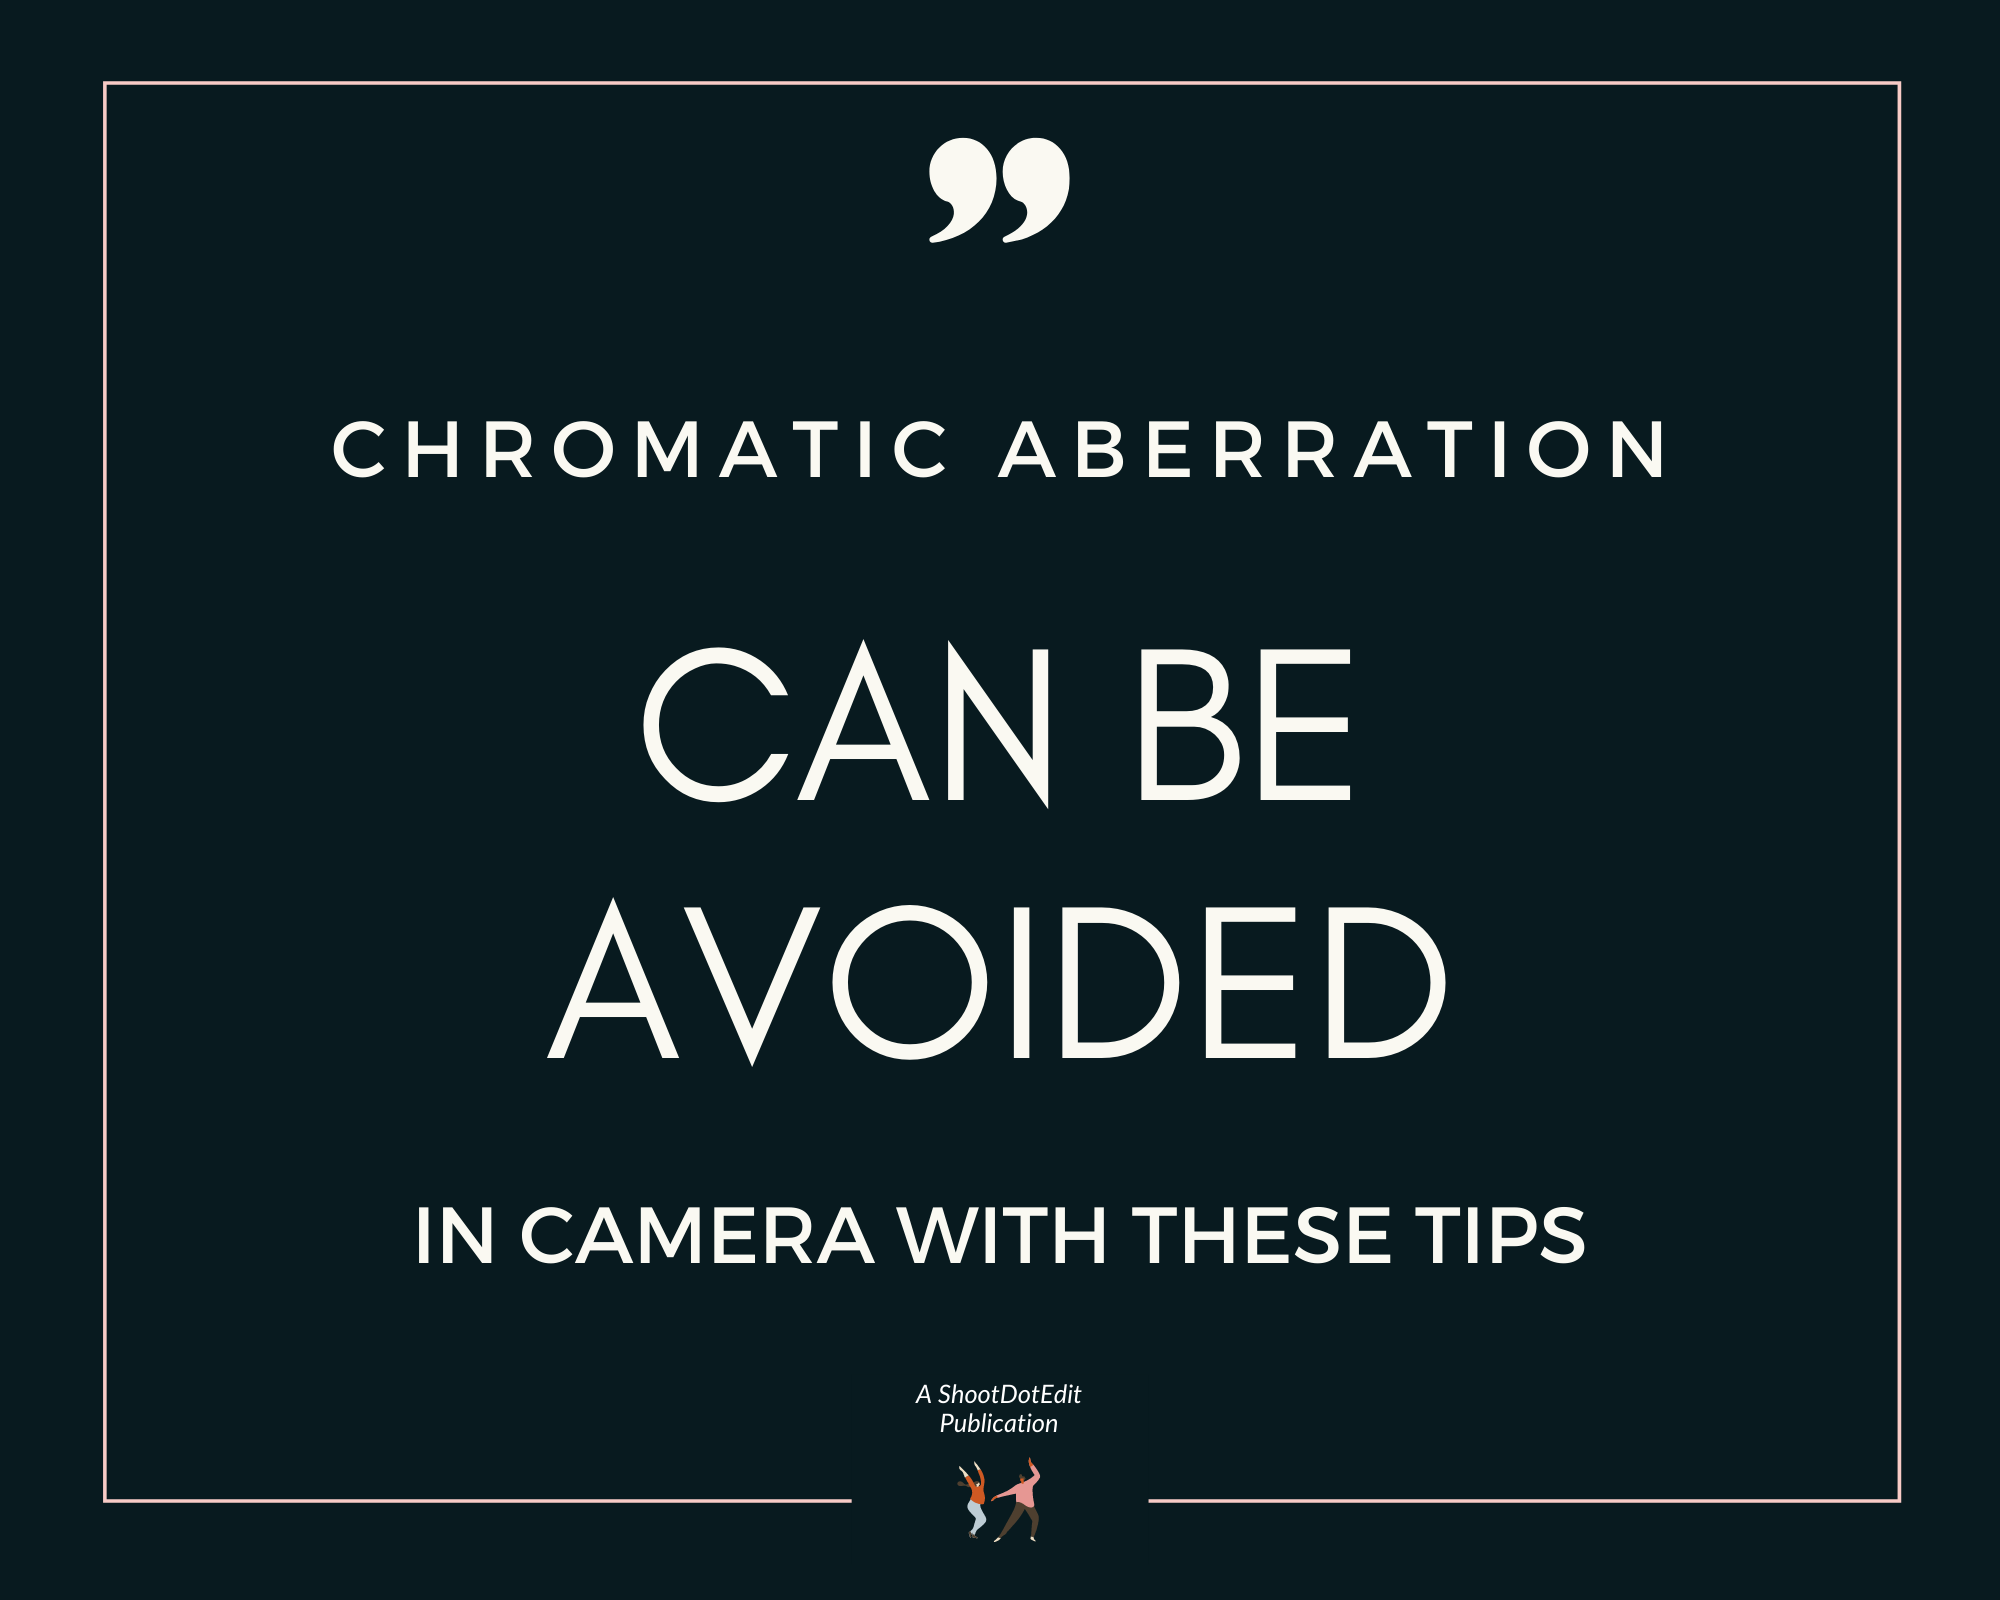 Infographic stating chromatic aberration can be avoided in camera with these tips